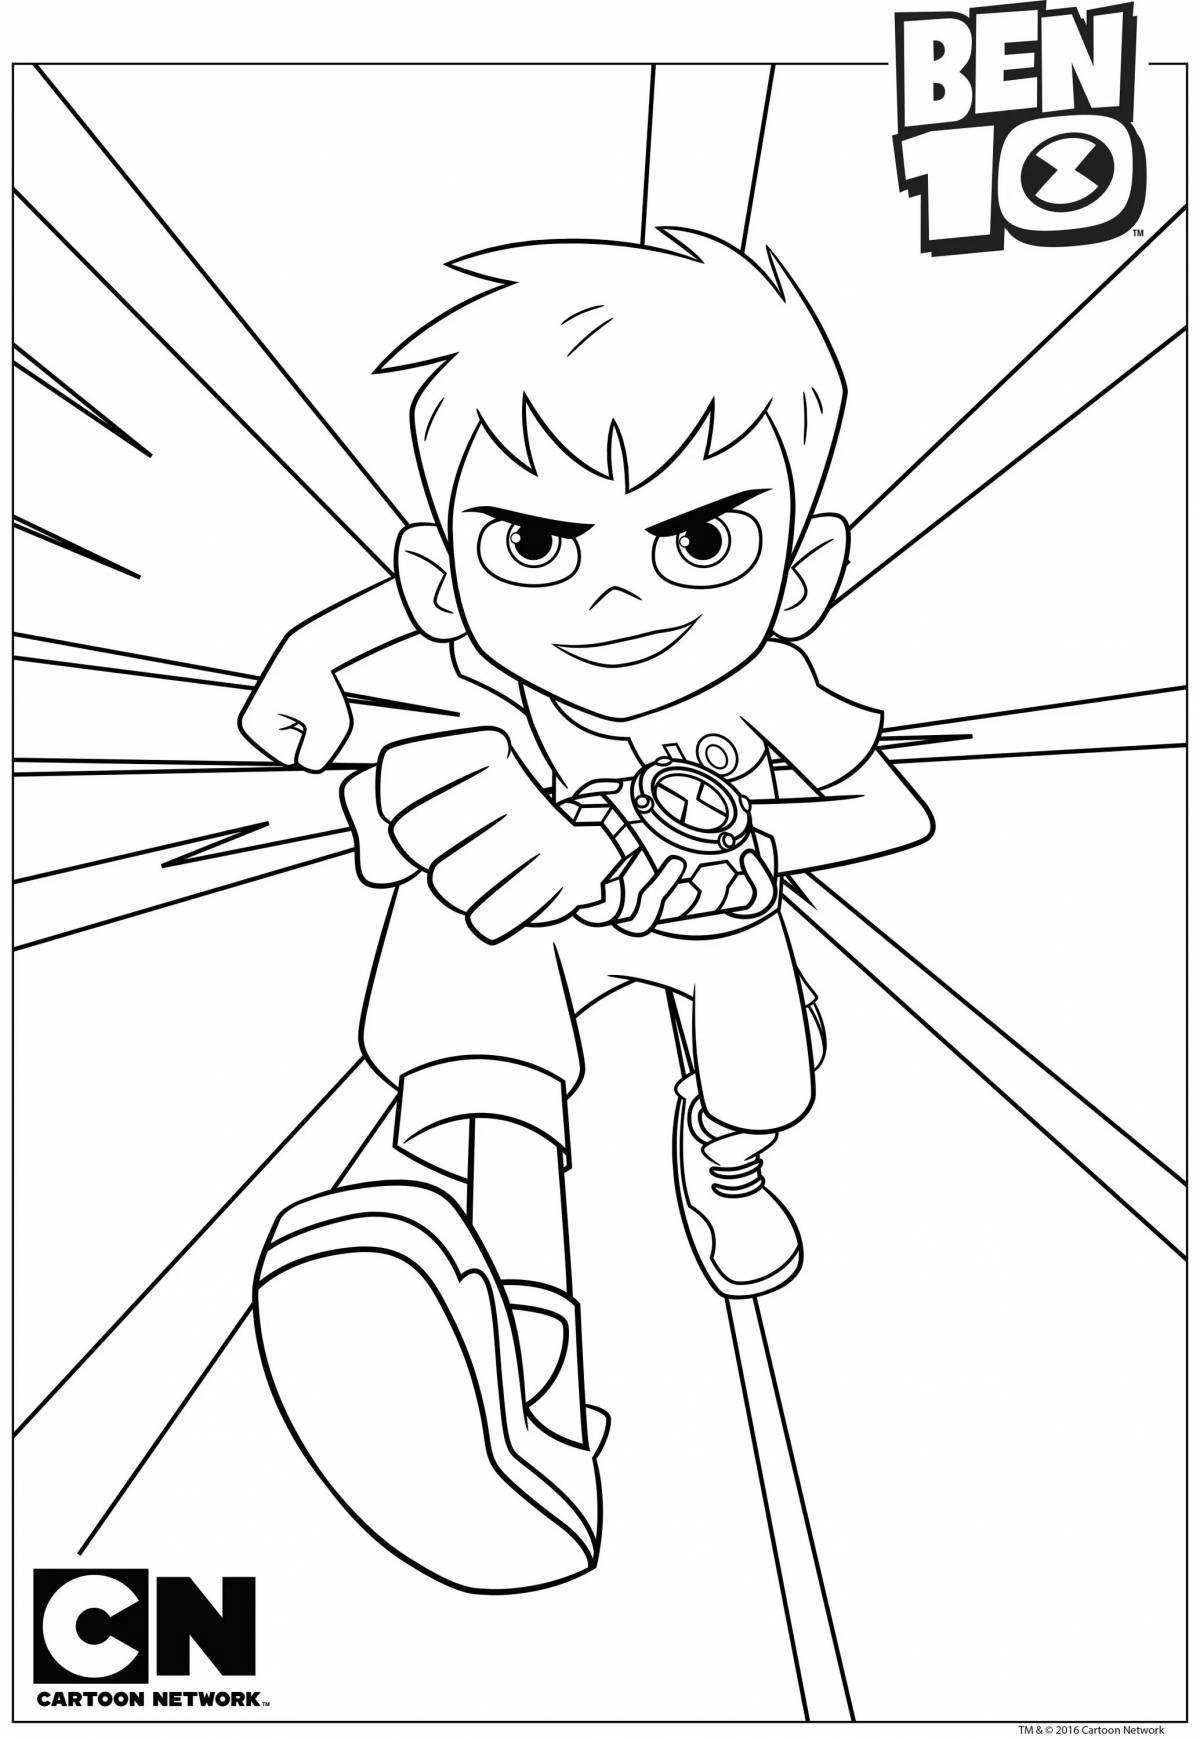 Playful omnitrix coloring page